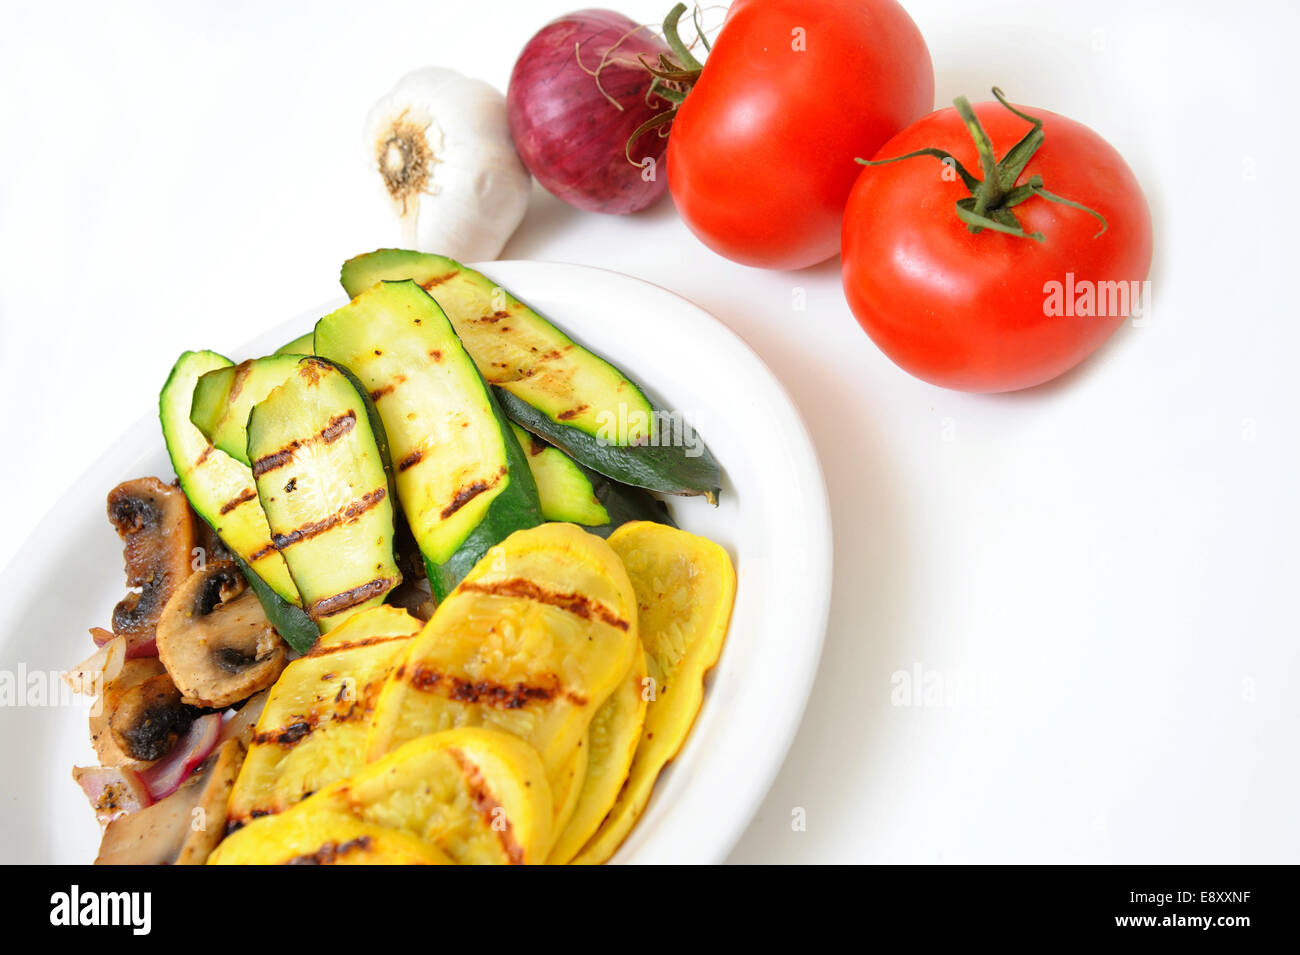 Grilled Squash And Mushrooms Stock Photo